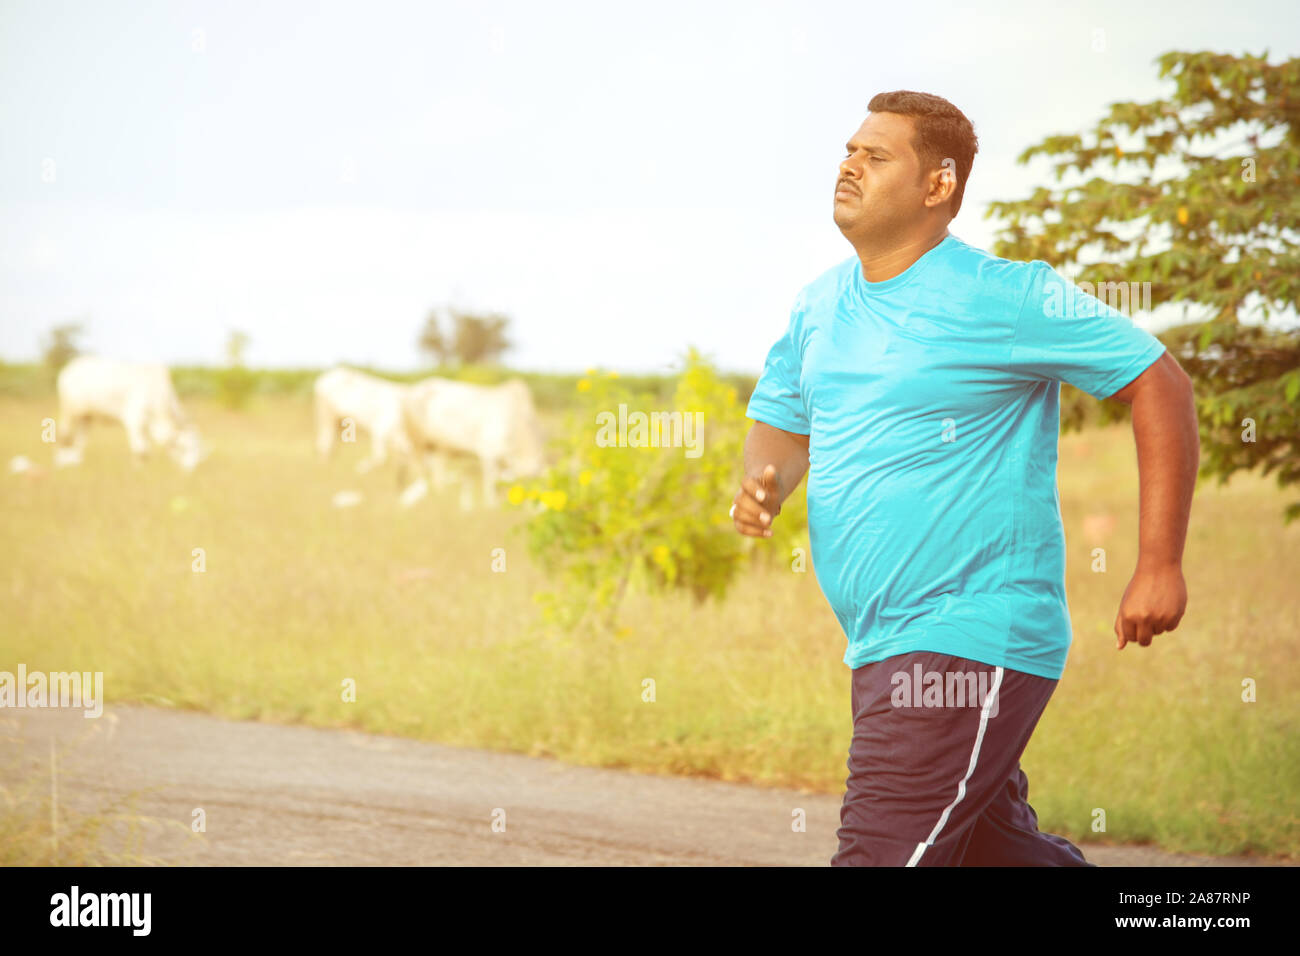 Overweight man running on road - concept of fat man fitness - obese person jogging to reduce the weight. Stock Photo